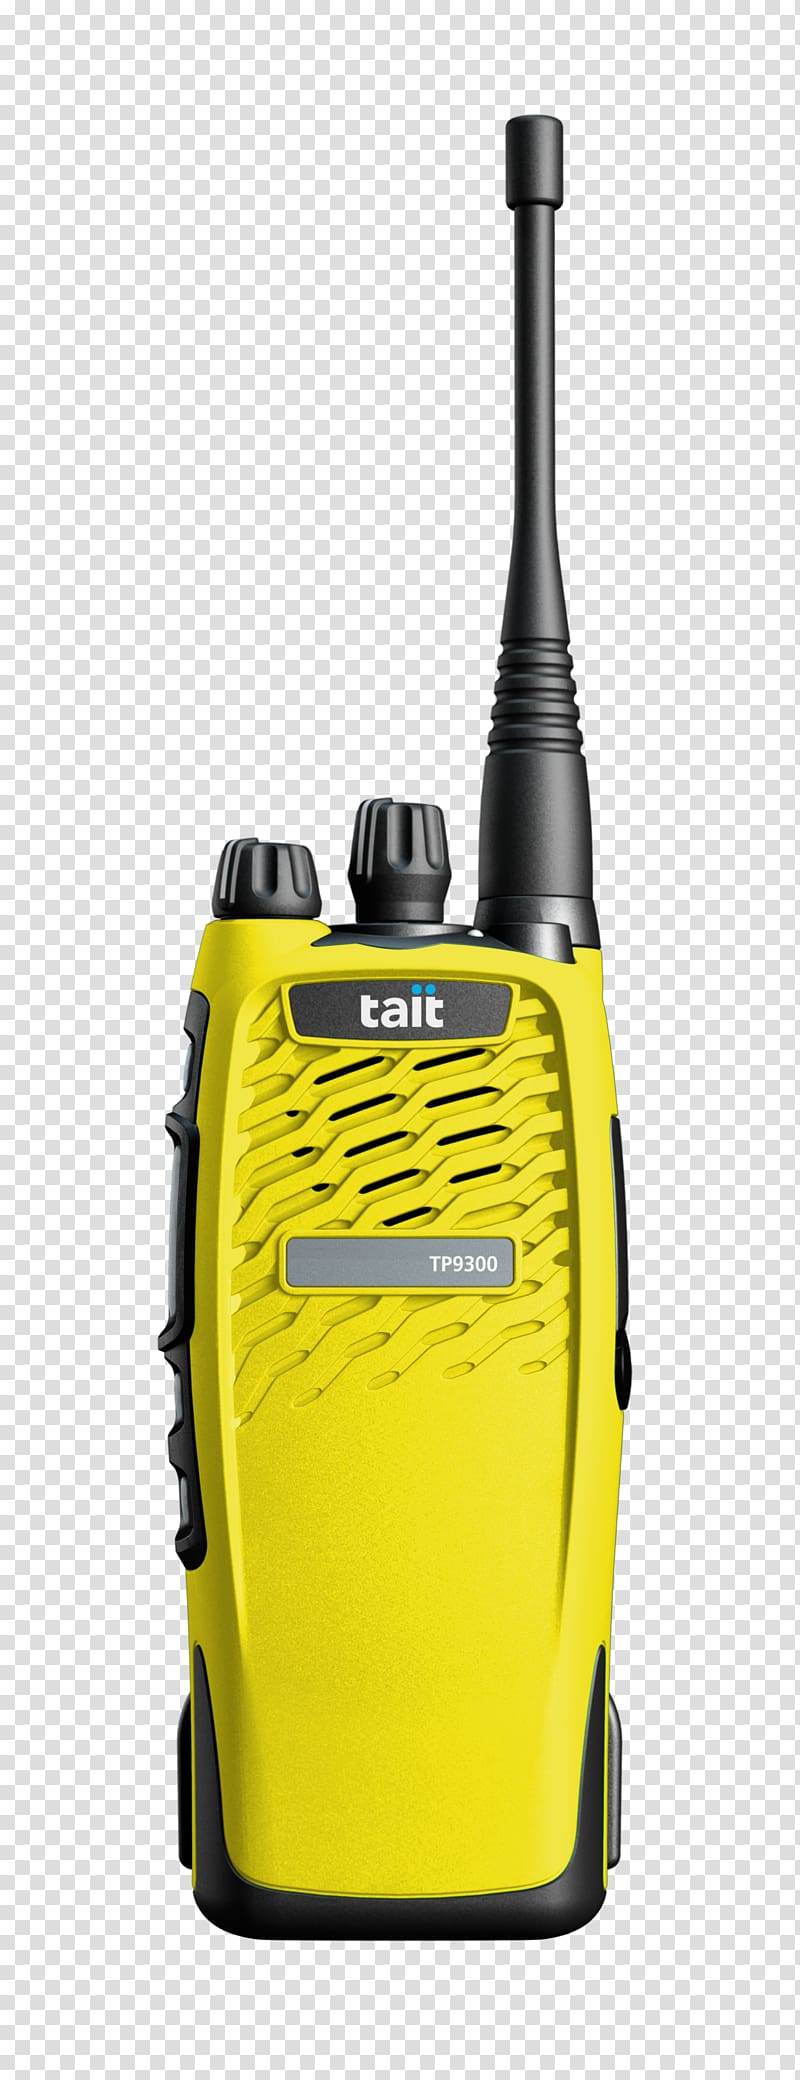 Digital mobile radio Tait Communications Project 25, radio transparent background PNG clipart